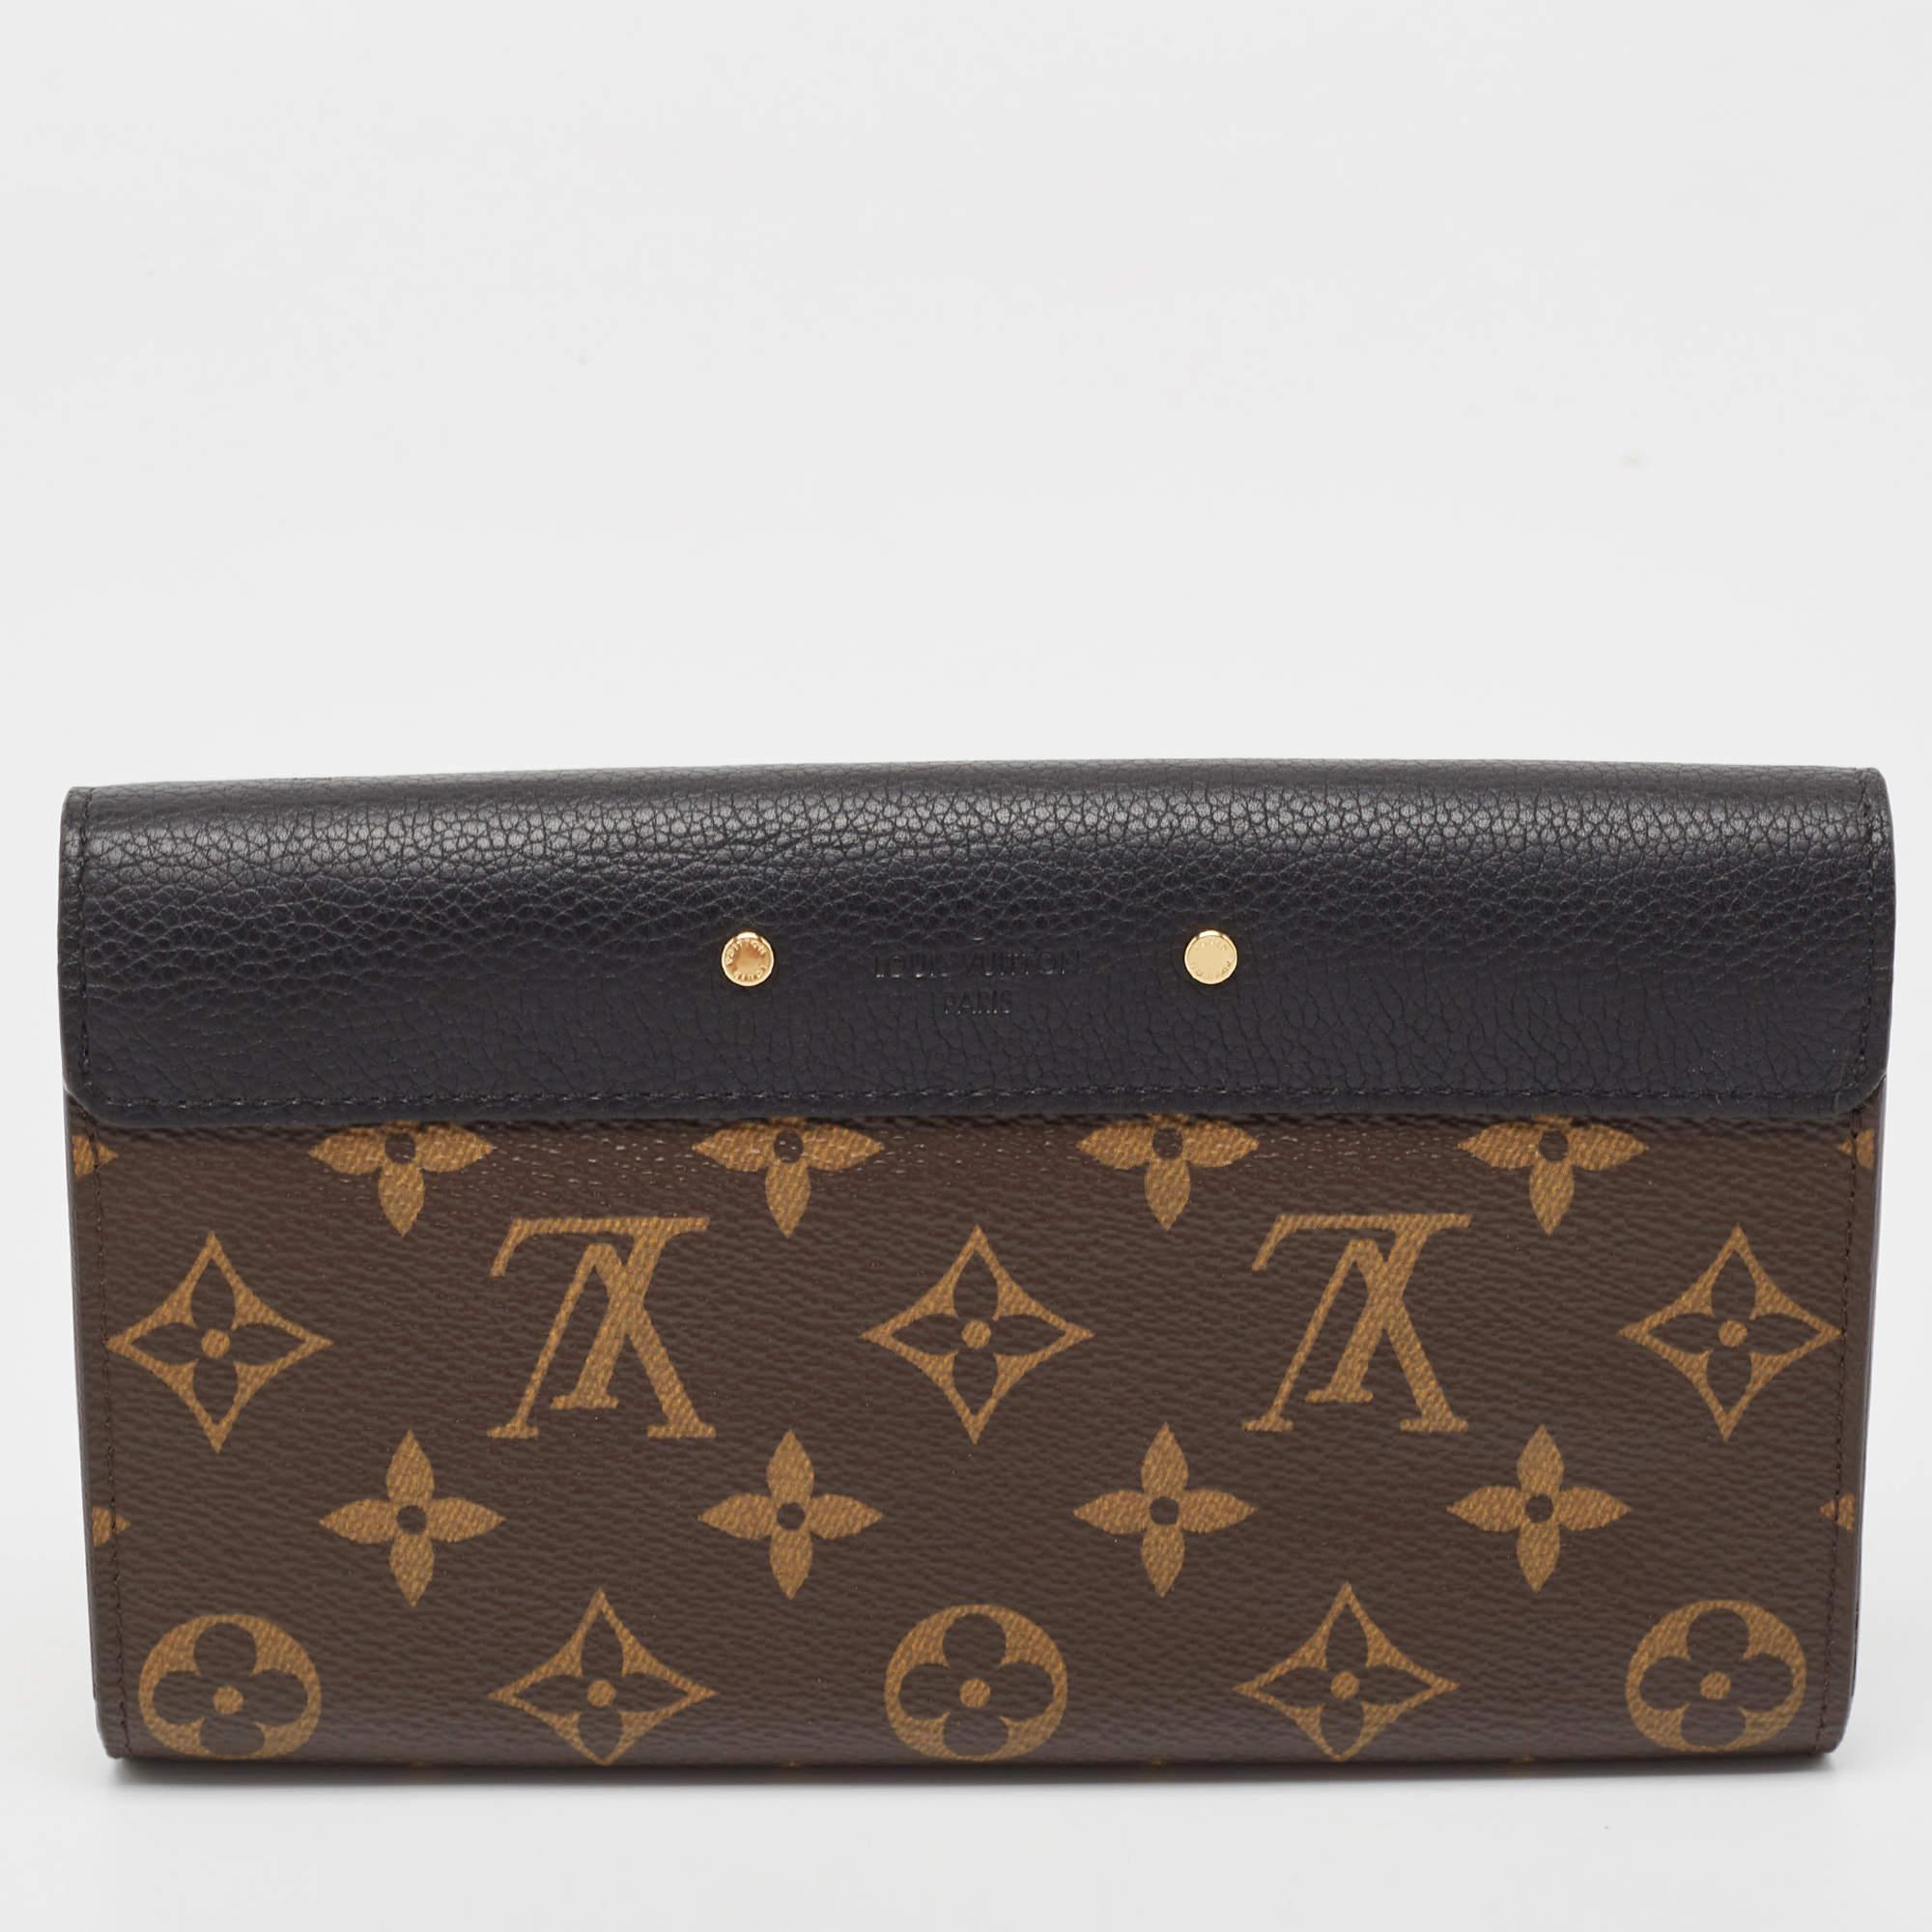 This classy LV Pallas wallet brings along a touch of luxury and immense style. It comes perfectly crafted to neatly carry your cards and cash.

Includes: Original Dustbag

